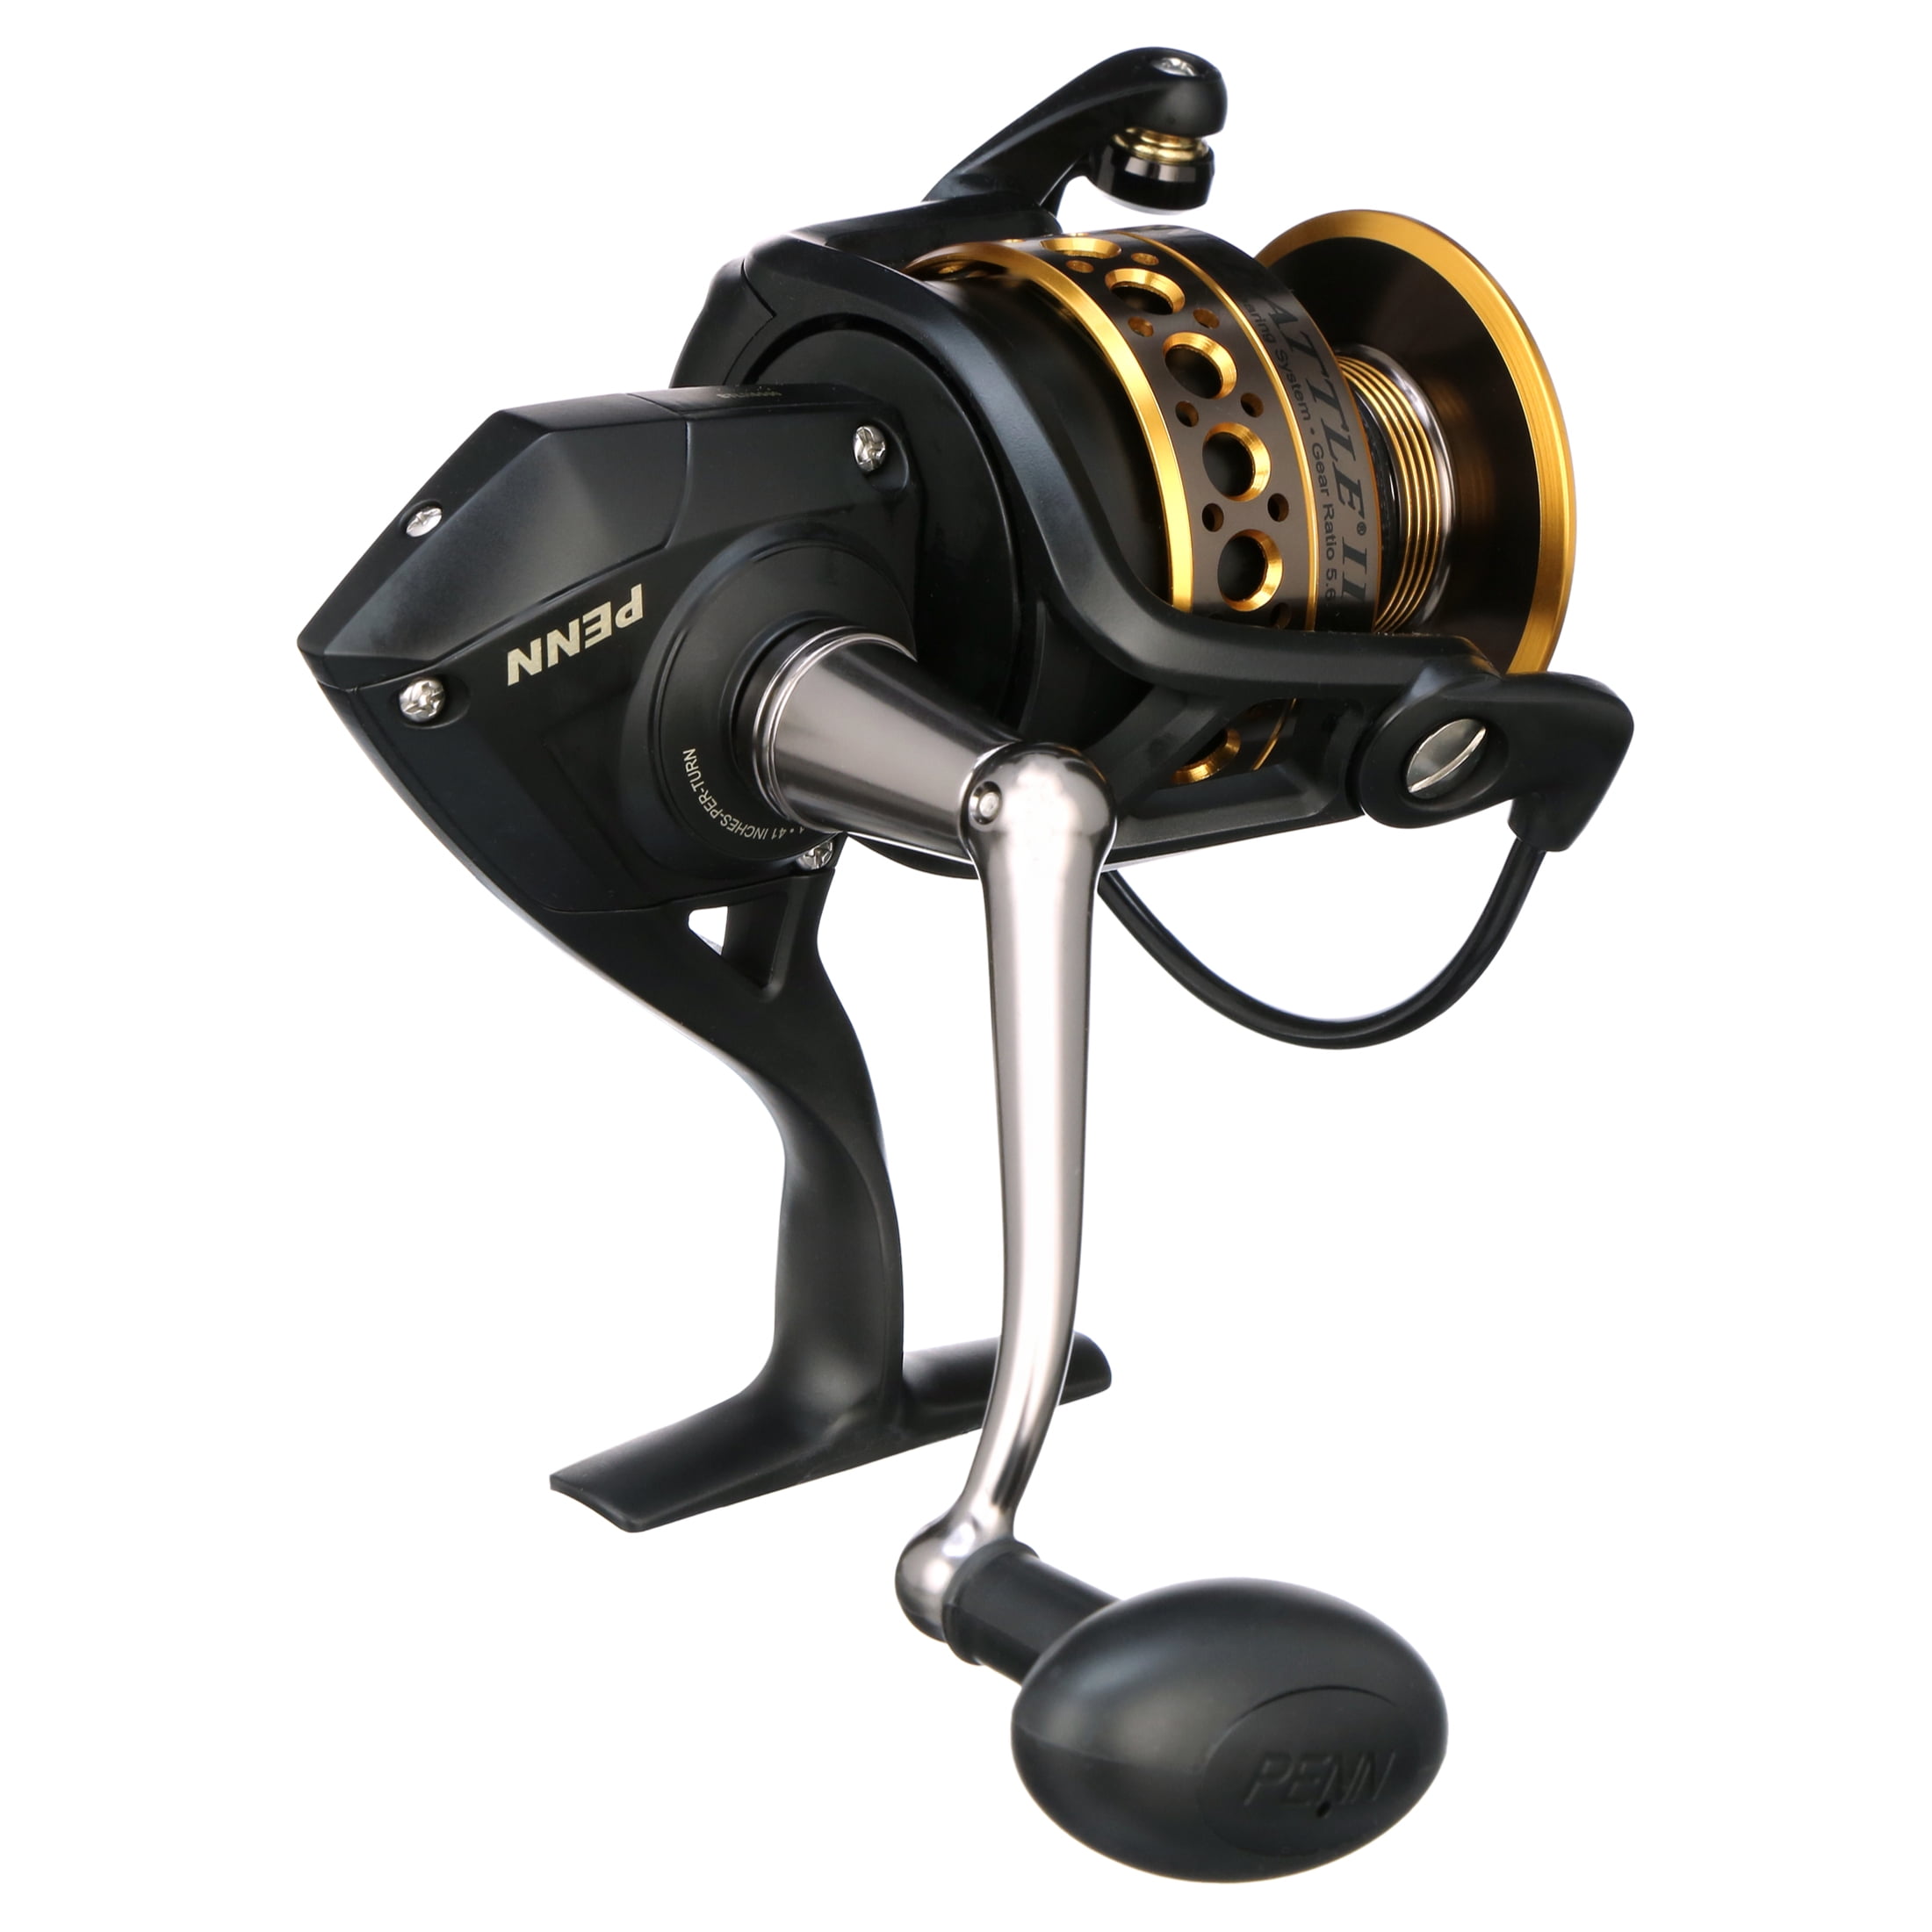 PENN reel saltwater CONFLICT II 2500 spinning - Pescamania